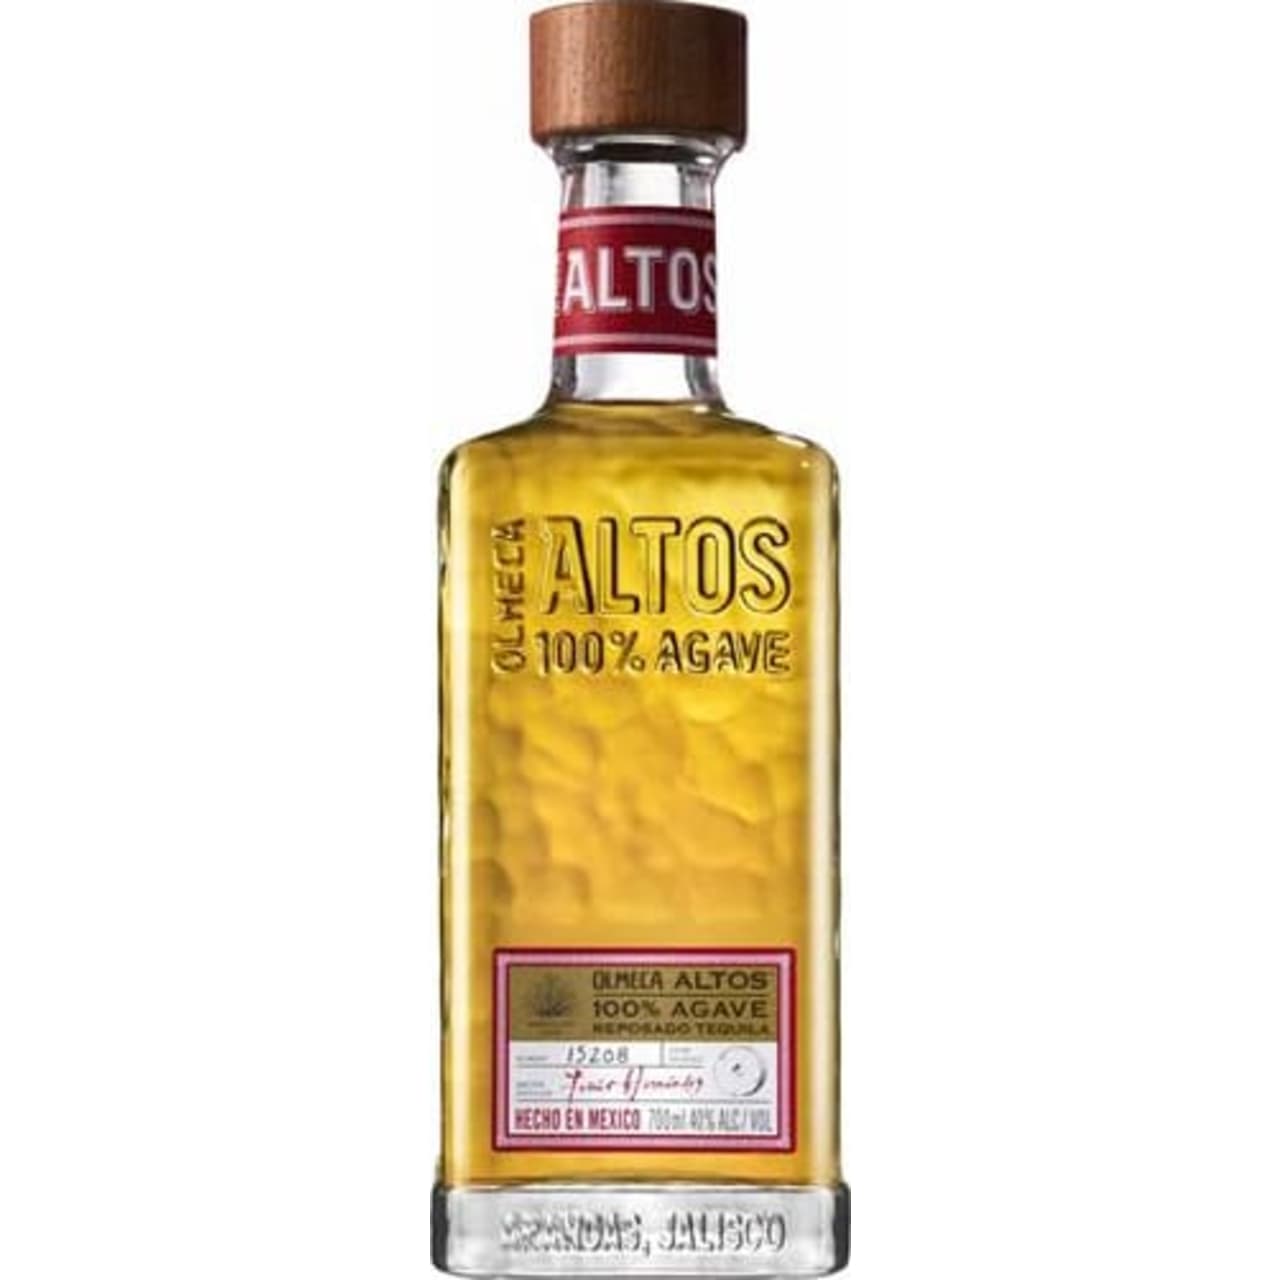 Olmeca Altos Reposado is a 100% agave Tequila that has rested in ex-whisky barrels for 8 months. Pepper, paprika and mocha play gently on the palate.